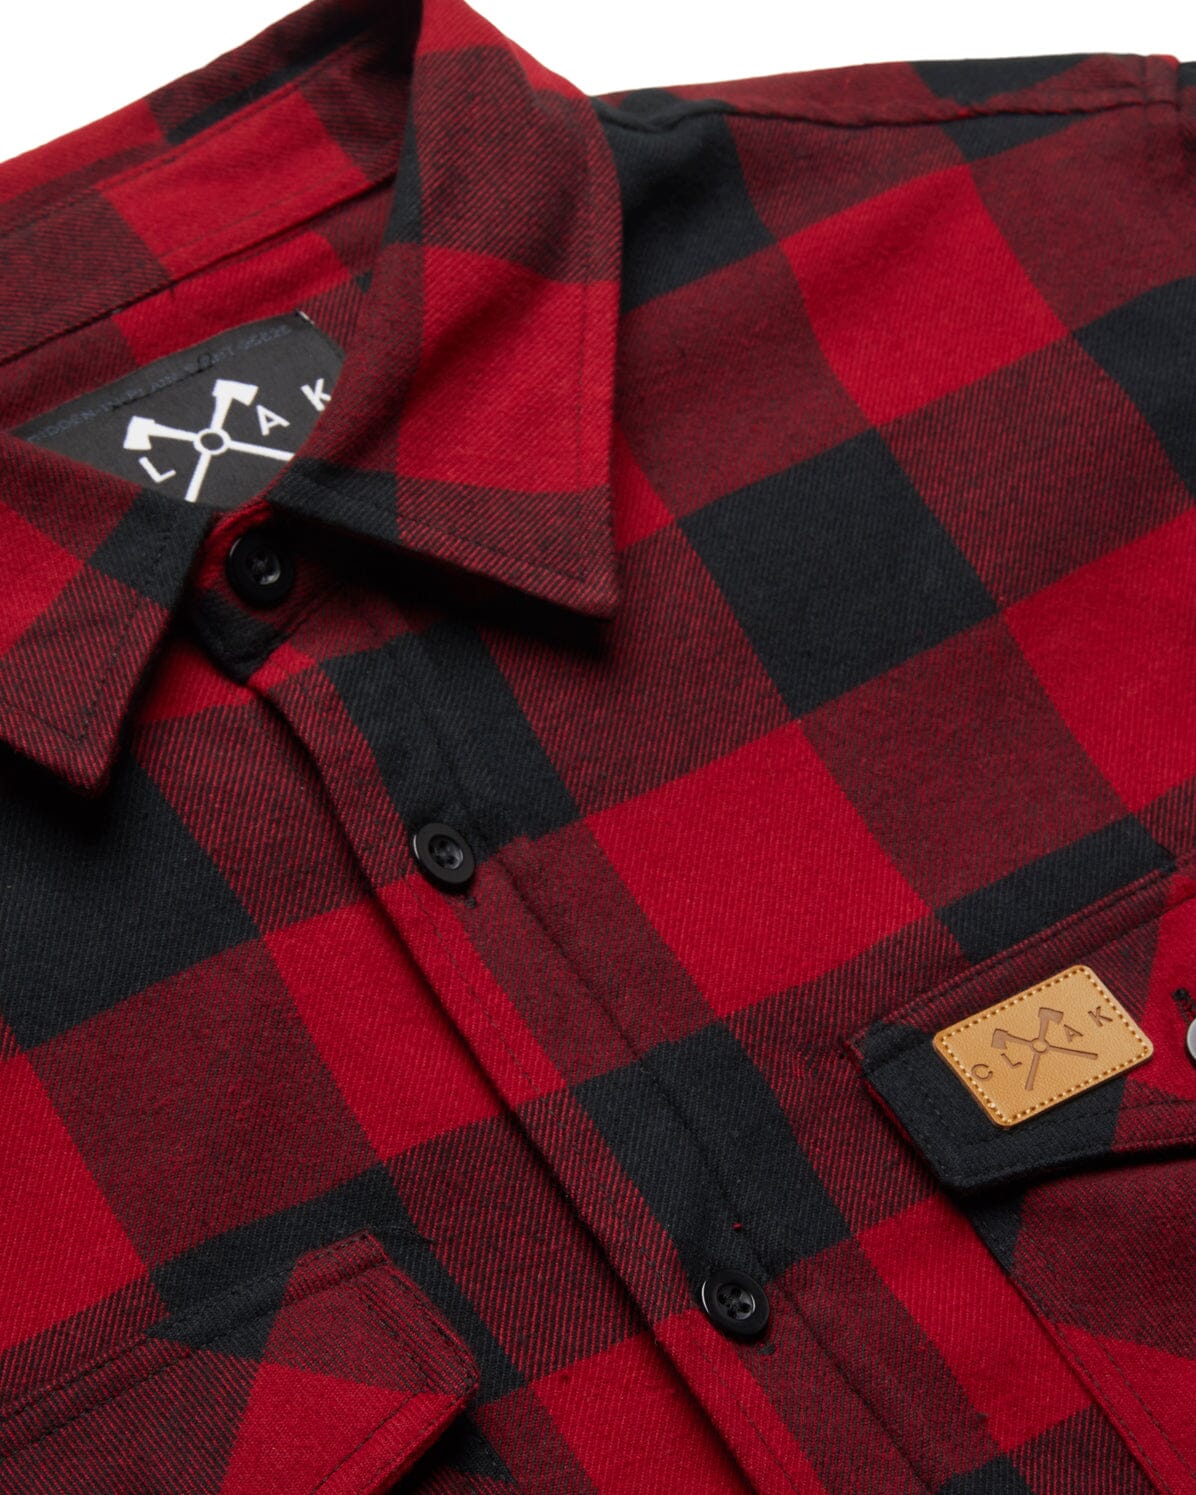 5YR LUCKY FLANNEL RED FLANNEL TOP VAULT0005 